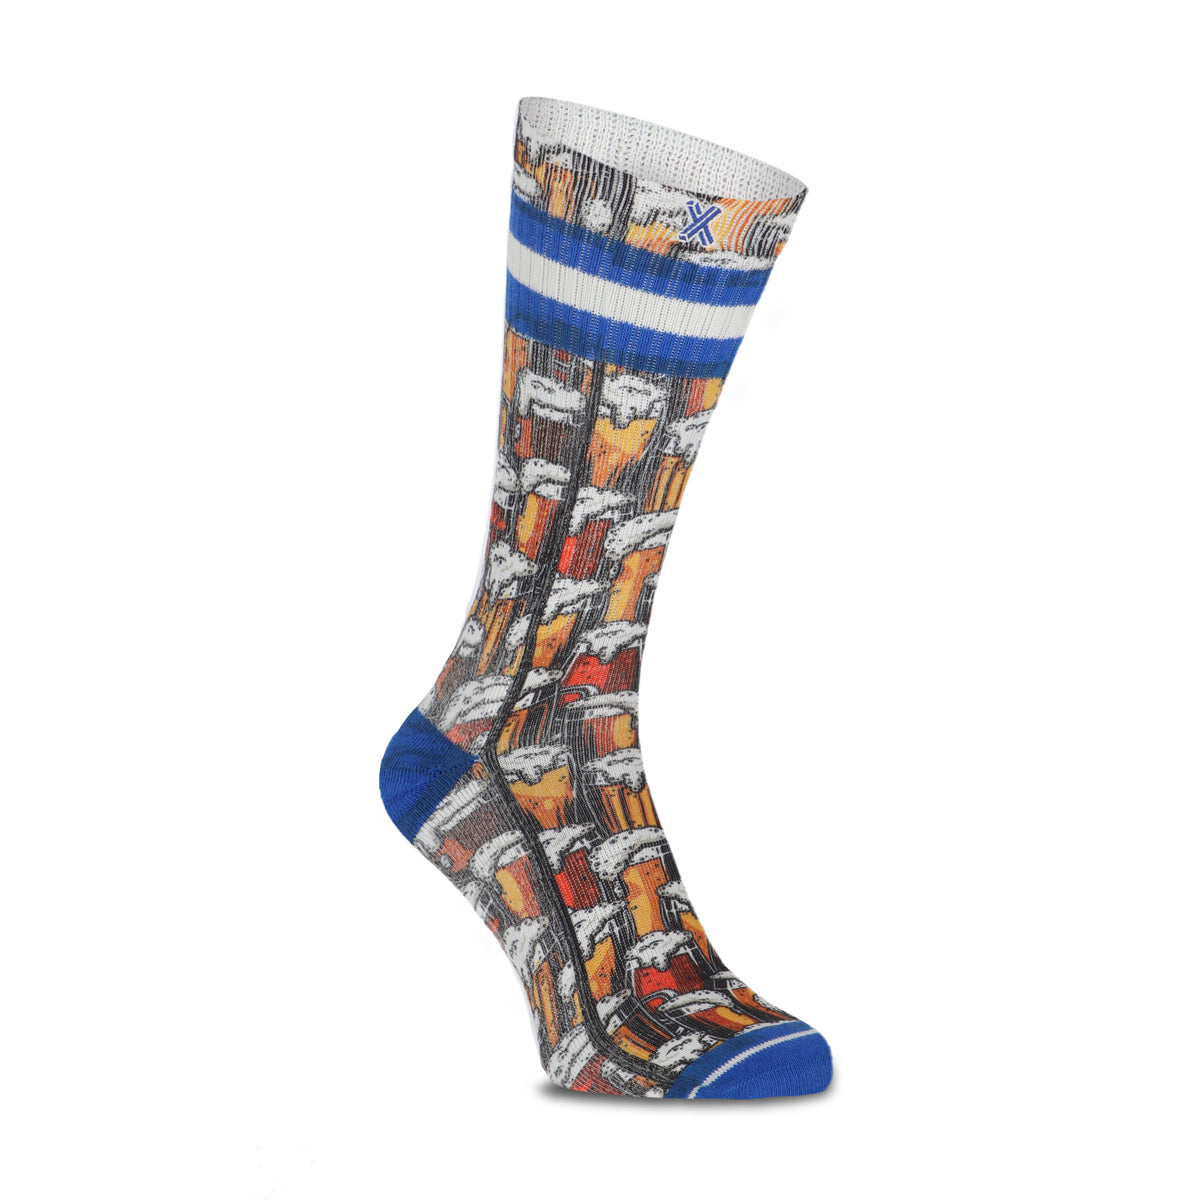 Hail to the Ale chaussettes pour hommes